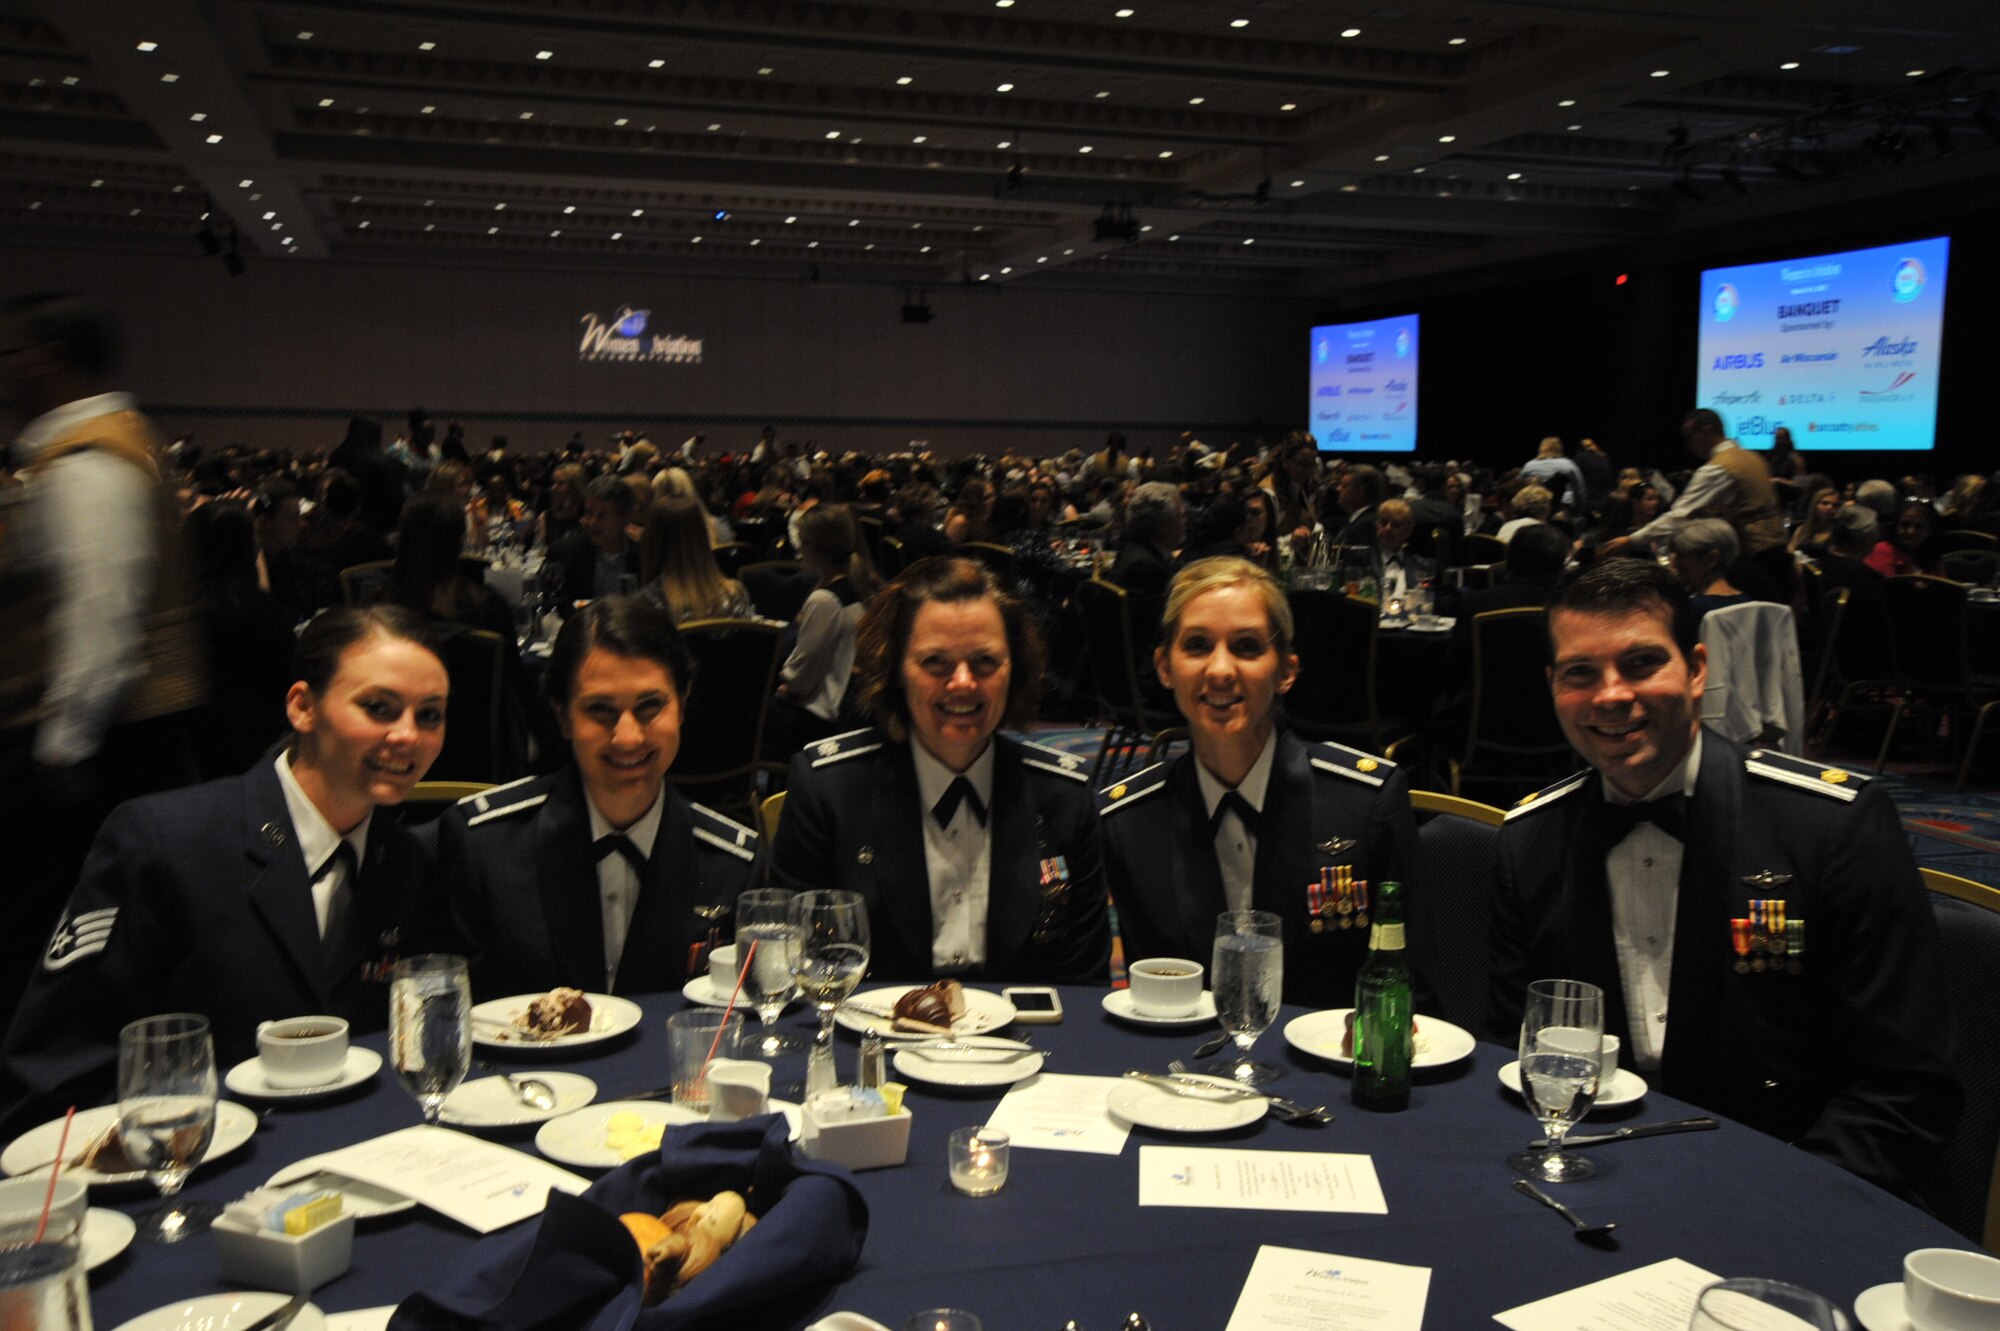 Members of Team McConnell enjoy the final banquet to honor Women in Aviation Pioneer inductees and scholarship recipients March 4, 2017 in Orlando, Fla. Over 120 different scholarships were distributed to further recipients’ careers in aviation, totaling $643,274. (U.S. Air Force photo/2nd Lt. Carla Stefaniak)